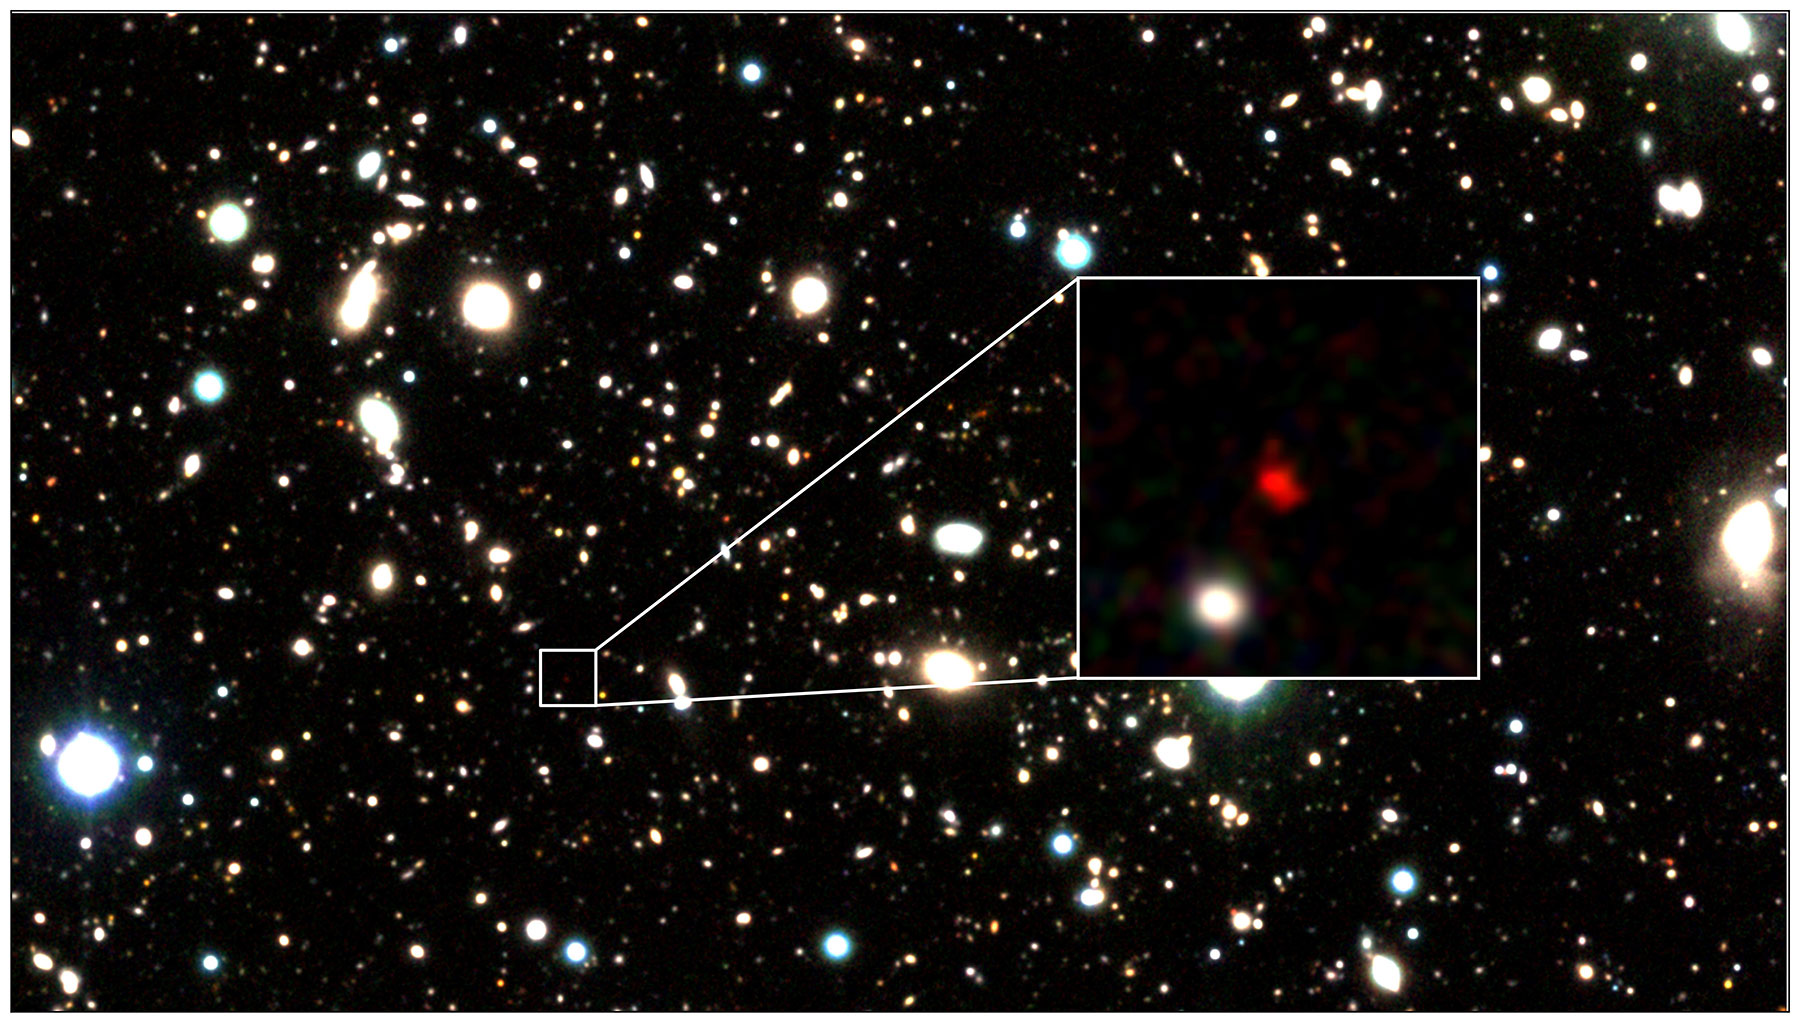 HD1, object in red, appears at the center of a zoom-in image.